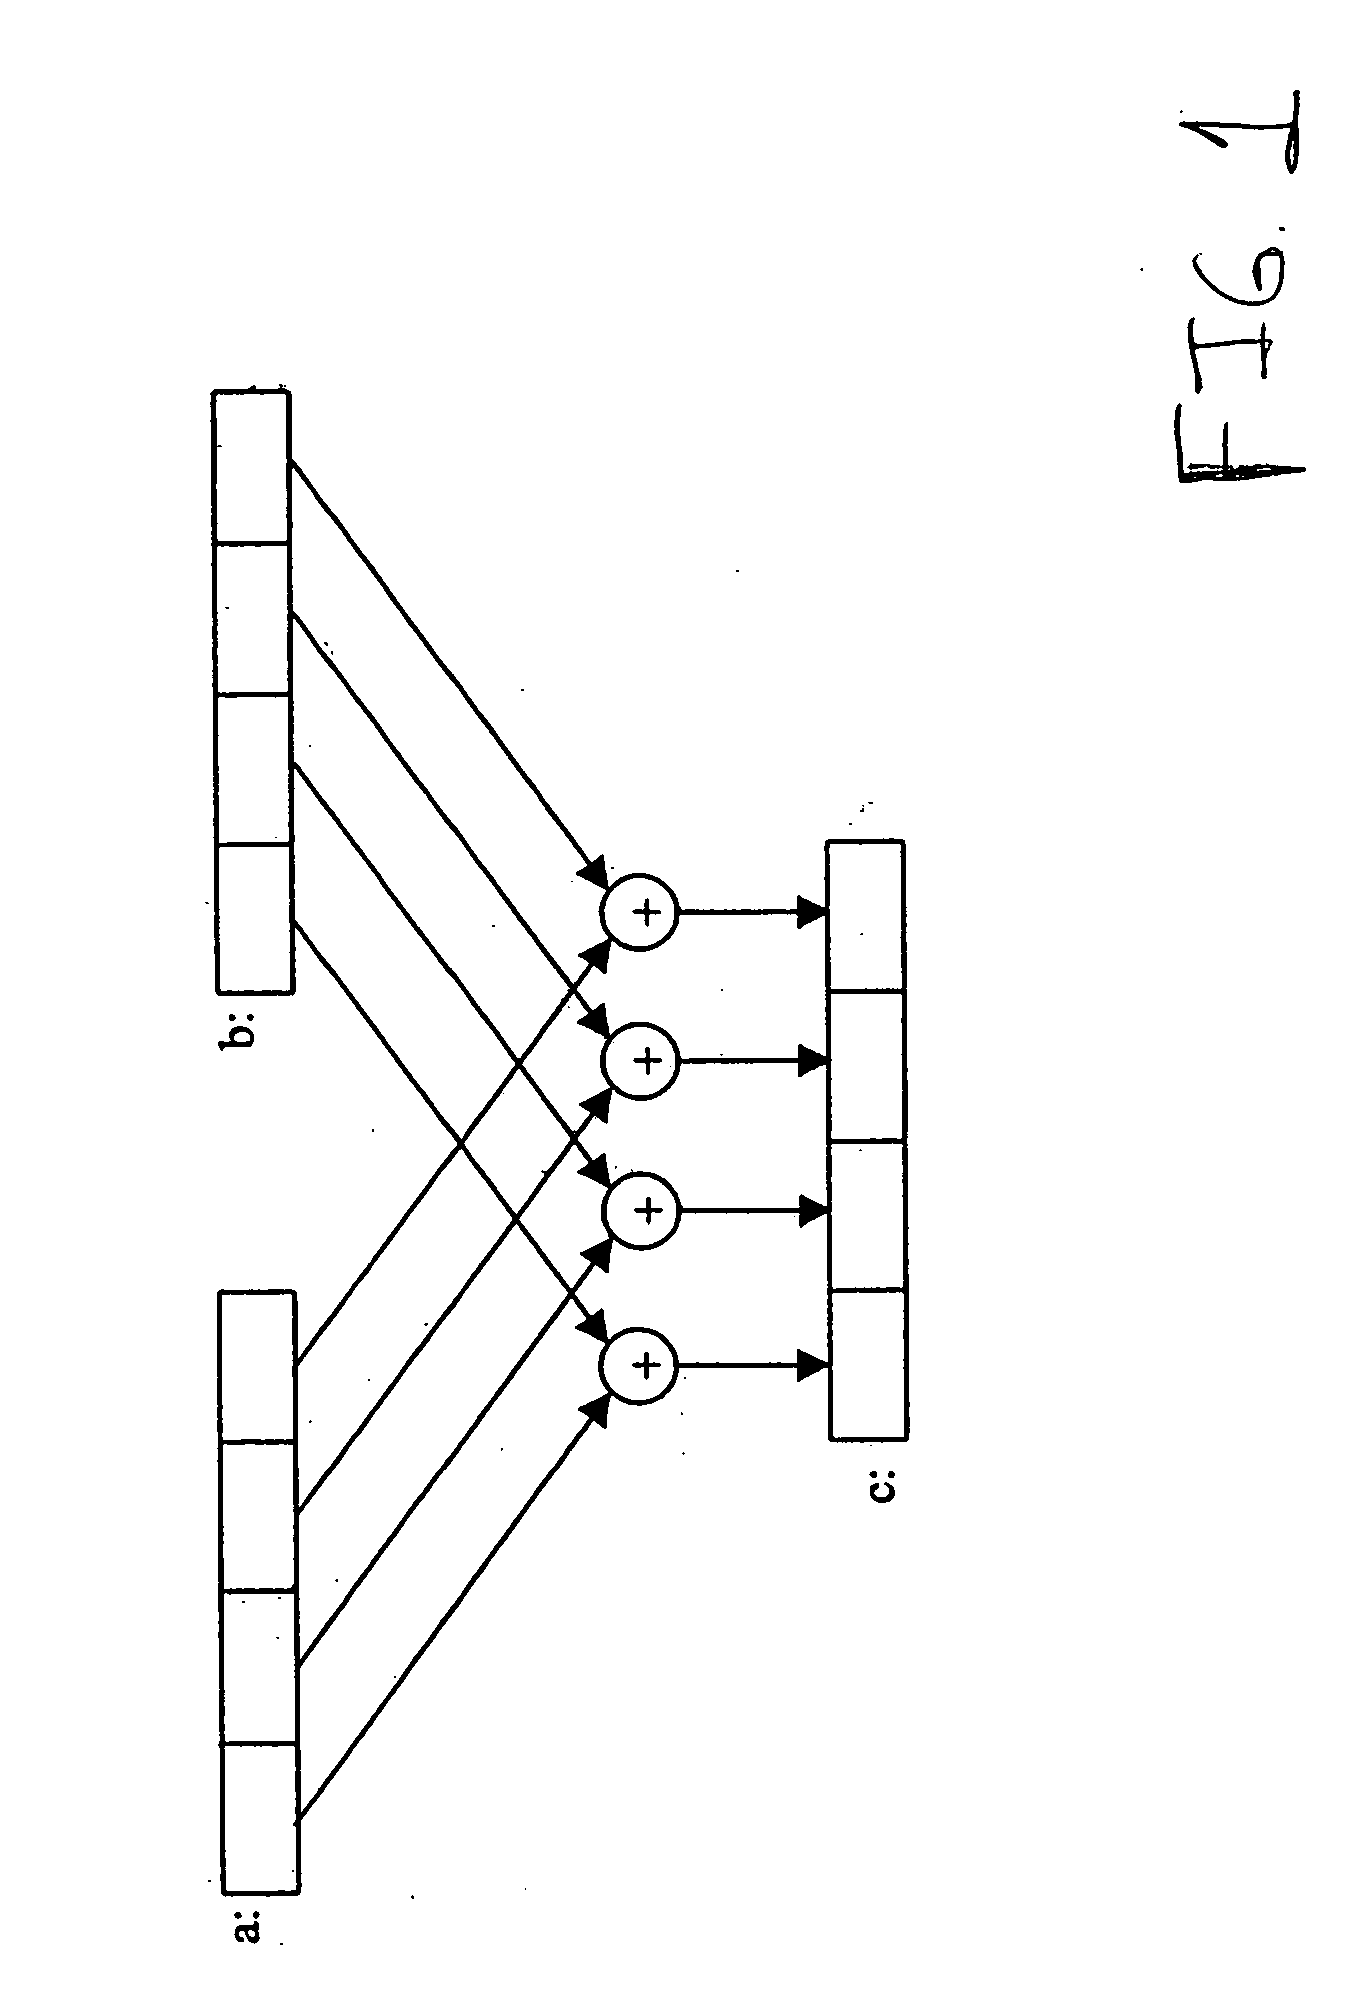 Methods for performing multiply-accumulate operations on operands representing complex numbers